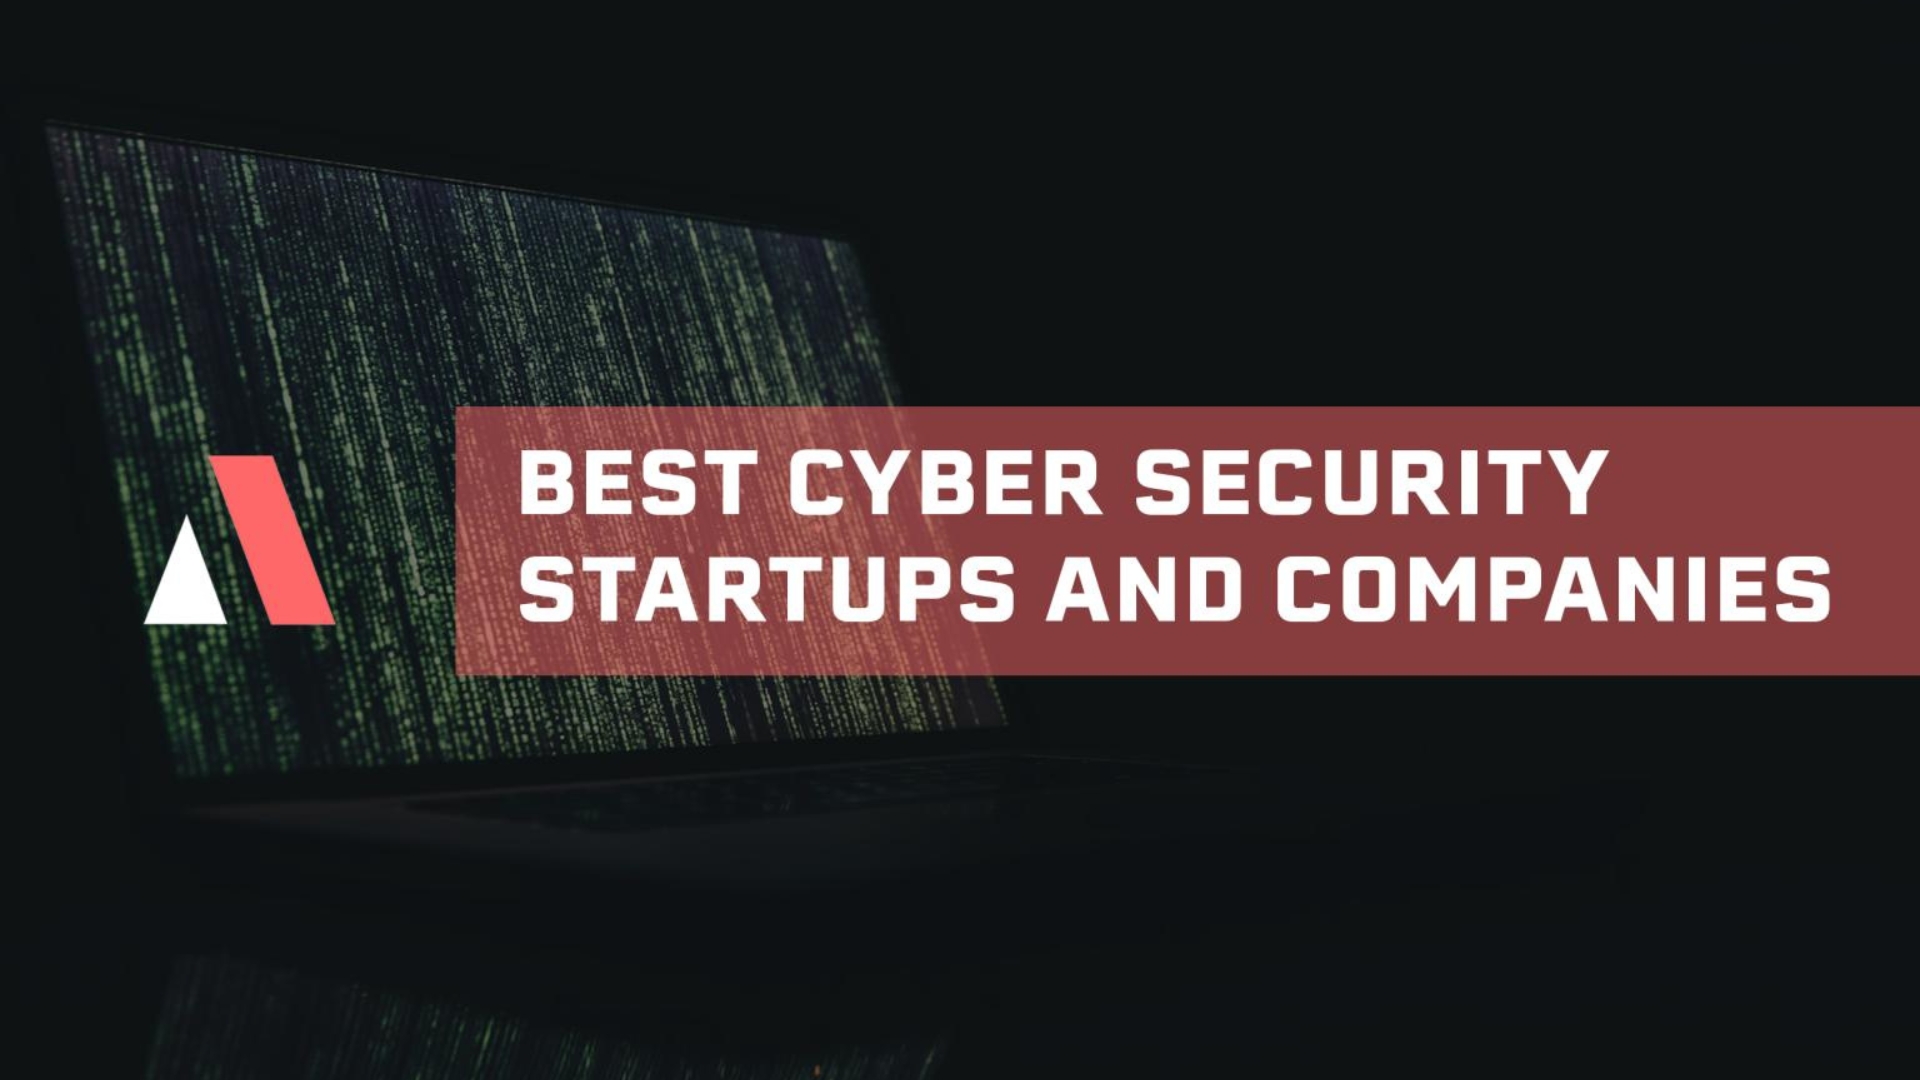 20 Most Innovative Cyber Security Startups & Companies (Milan)